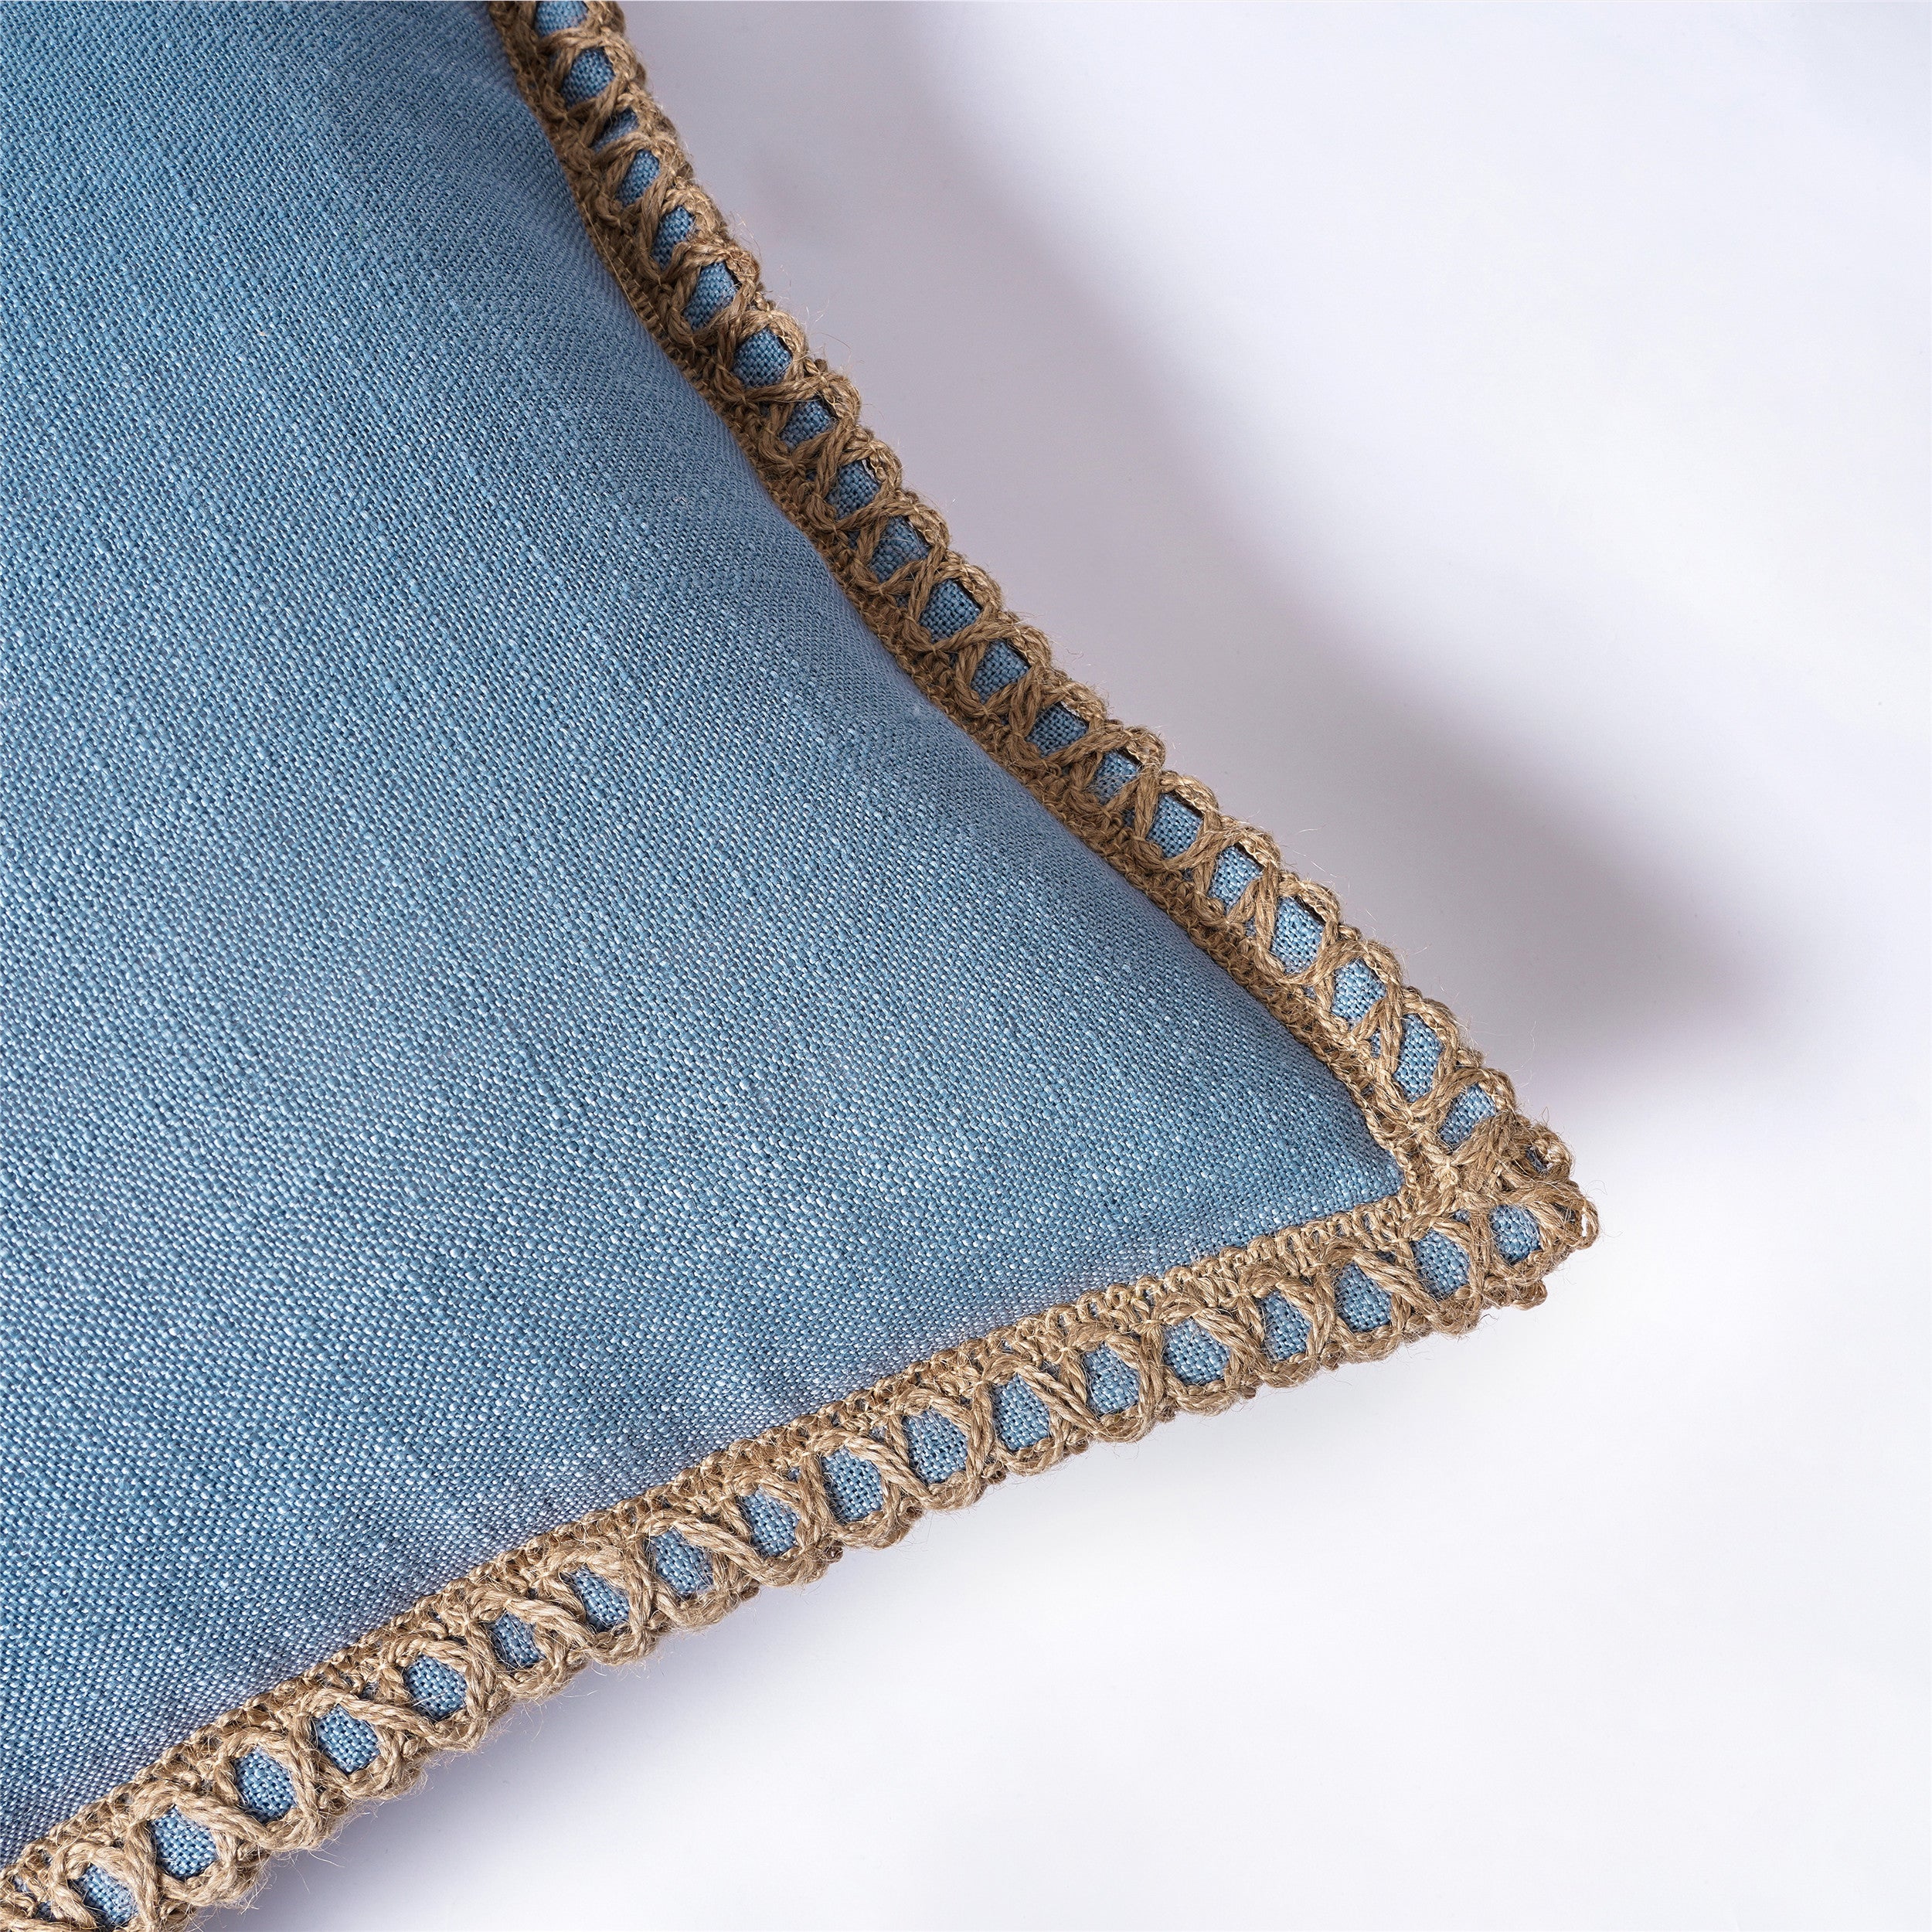 Linen Appearance With Sewn Hemp Rope On The Edge Breathable Pillow Cover